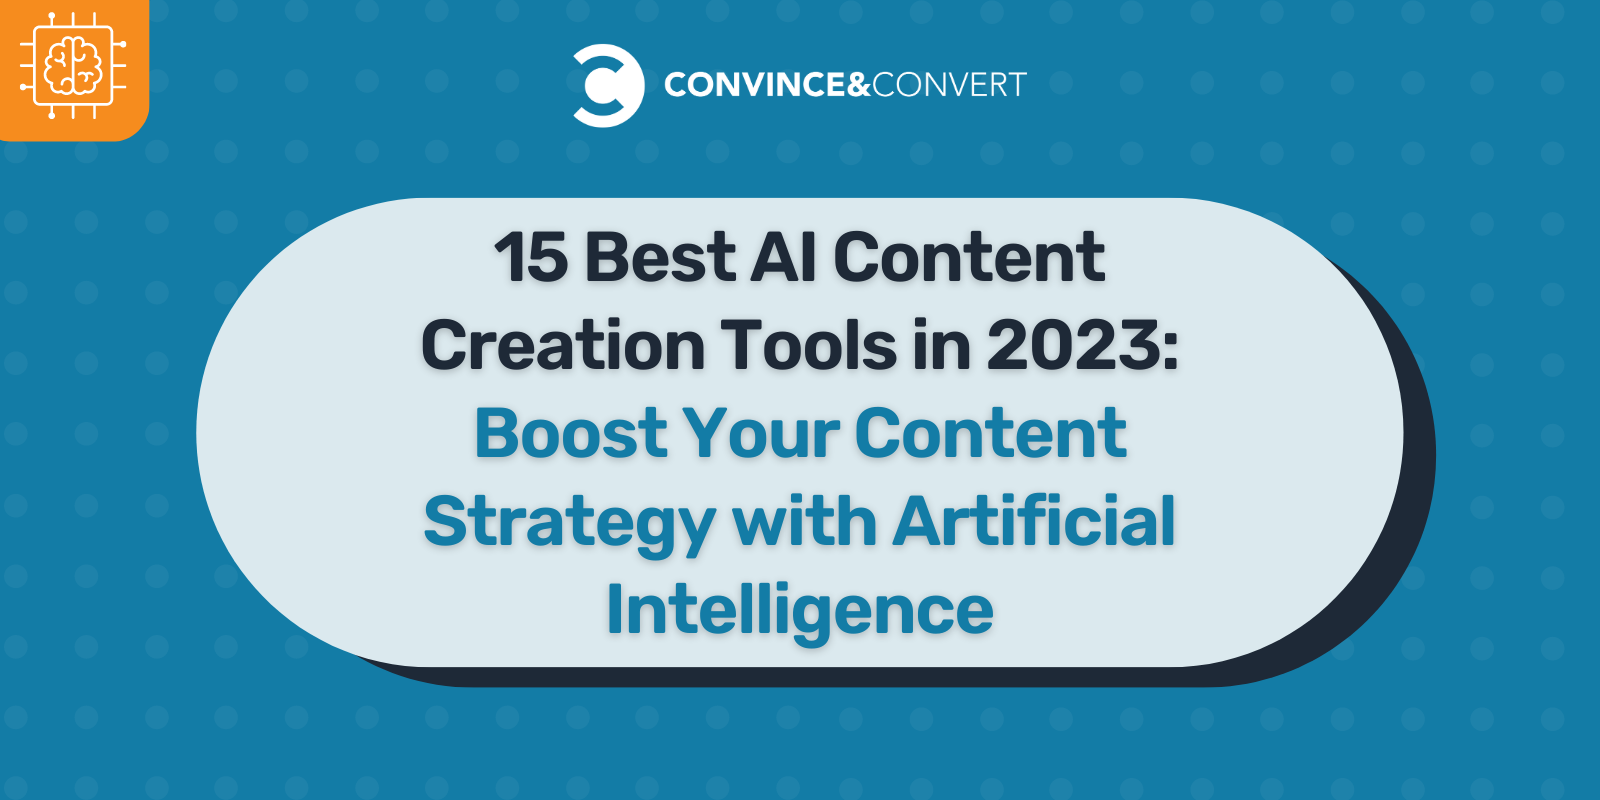 15 Best AI Content Creation Tools in 2023 Boost Your Content Strategy with Artificial Intelligence